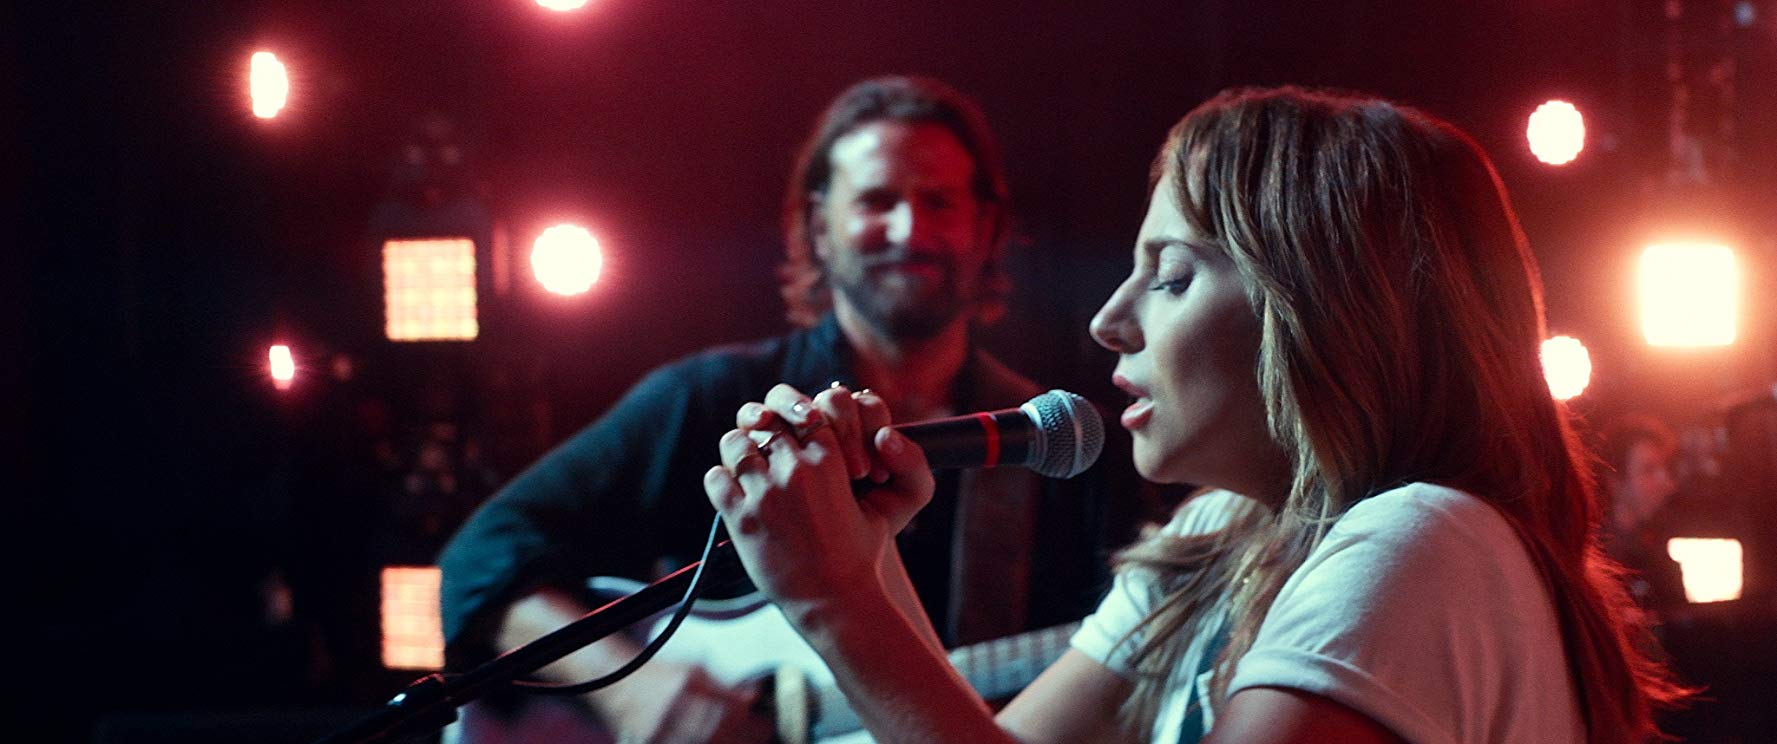 movie review, a star is born, Lucas Mirabella